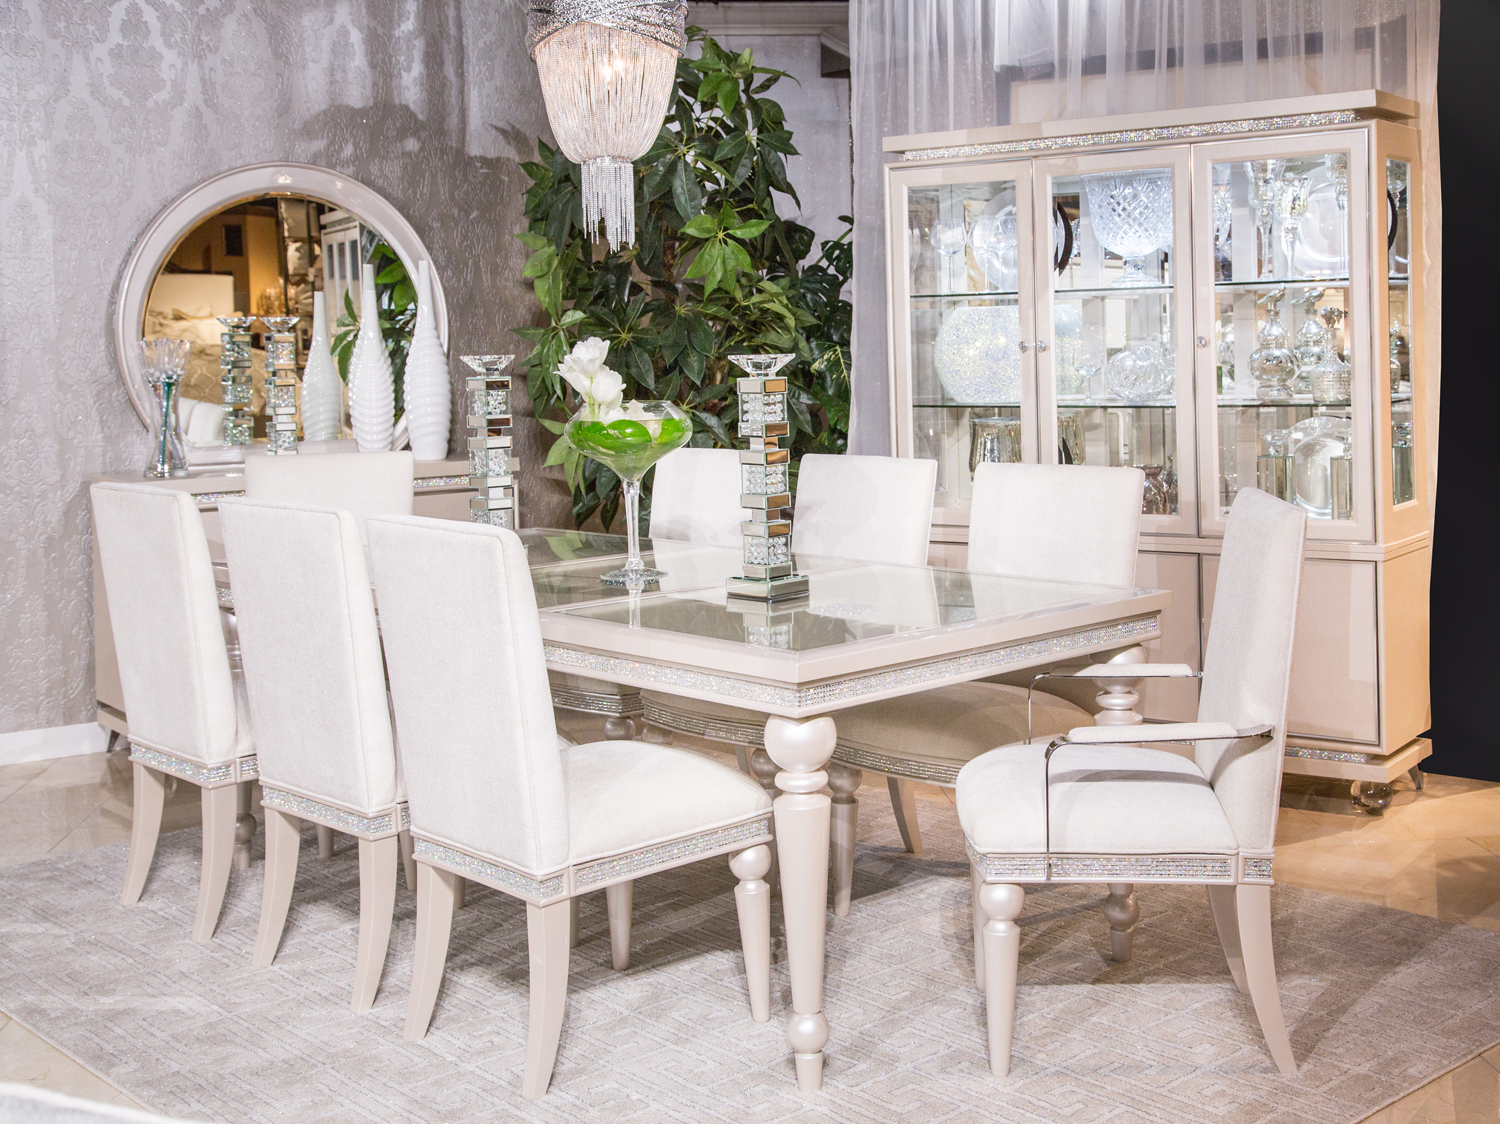 Dining Room Set With Ivory Chairs